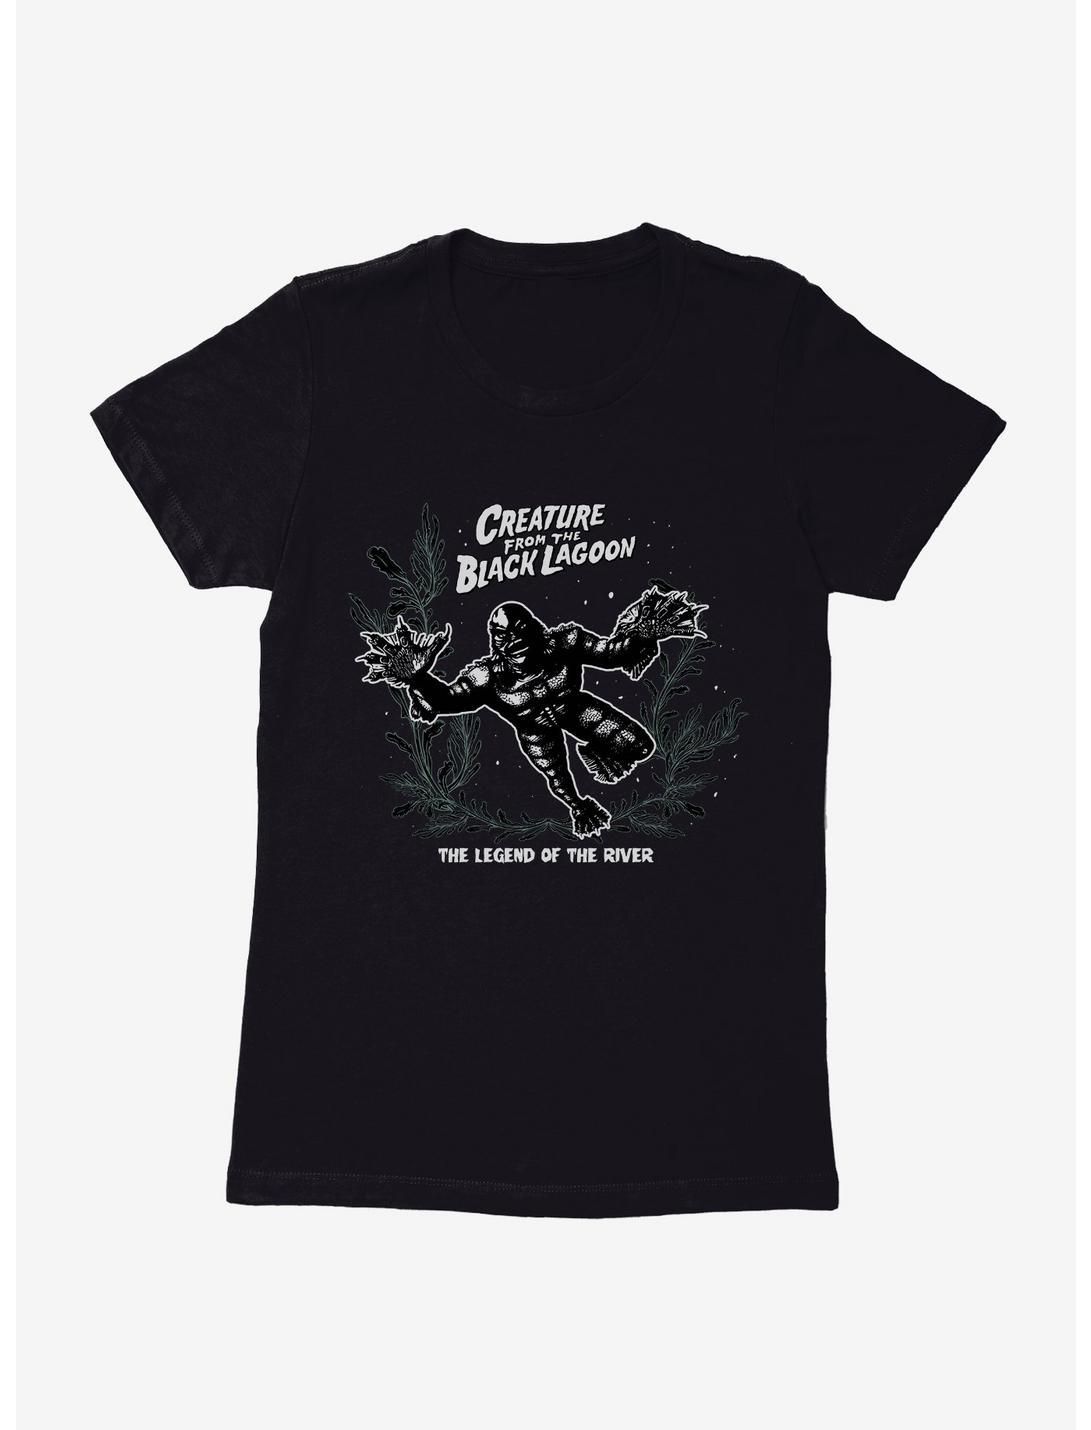 Creature From The Black Lagoon Legend Of The River Womens T-Shirt, BLACK, hi-res